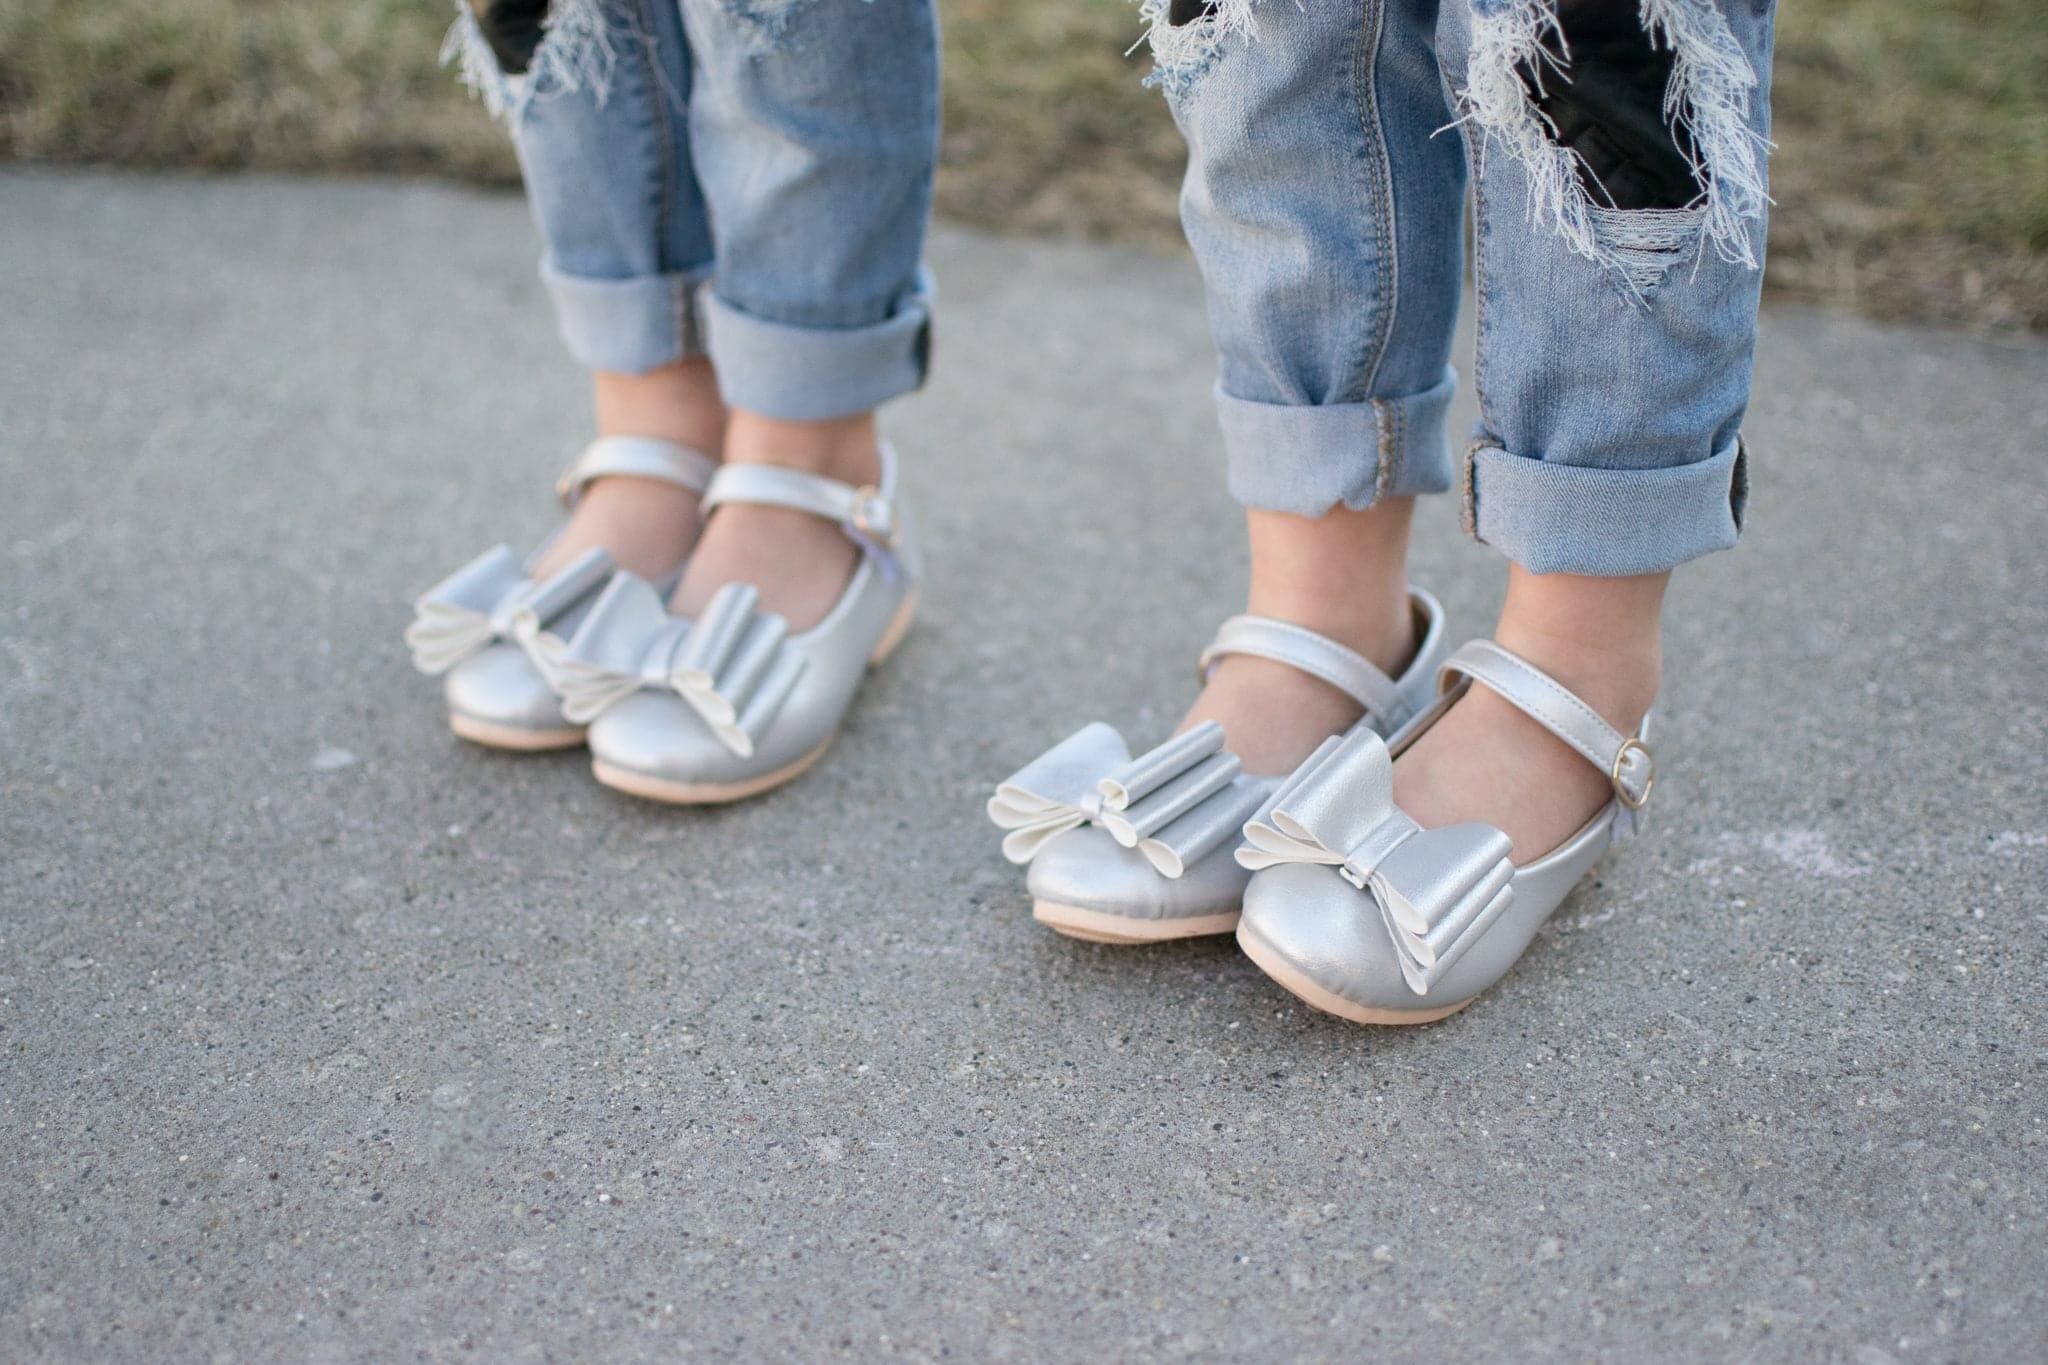 [Silver] Bow Shoes